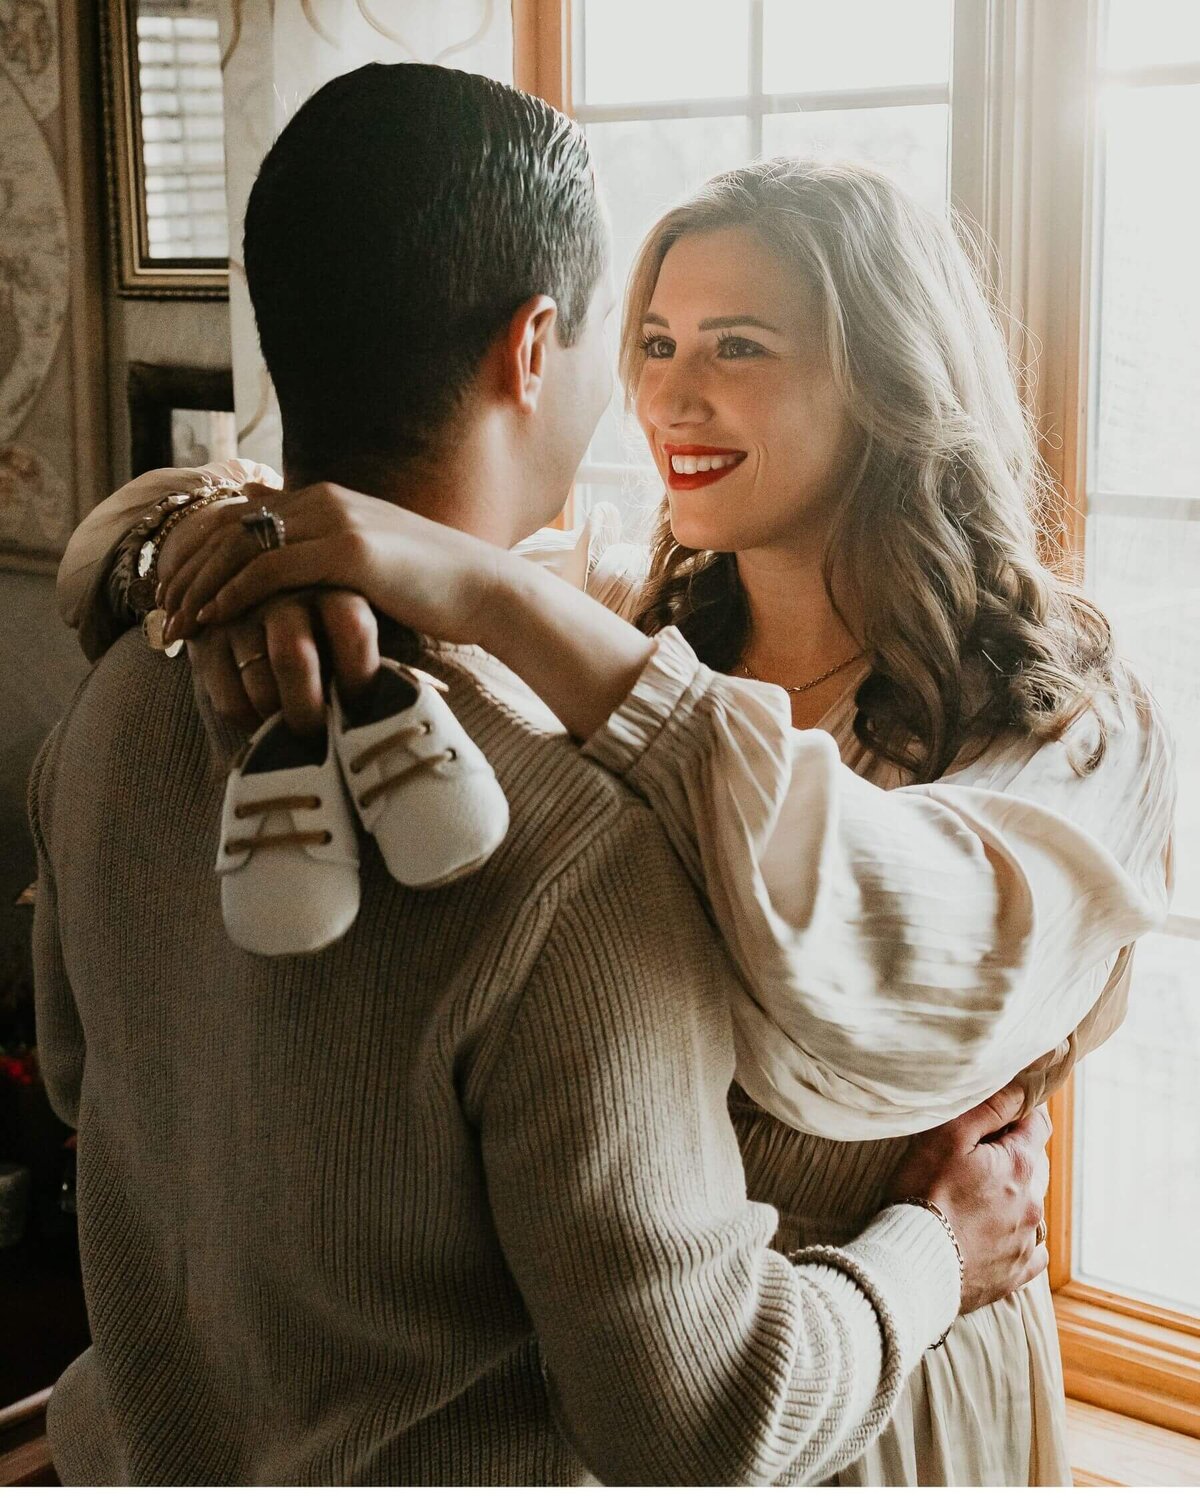 A maternity photographer in Pittsburgh capturing a couple embracing by a window.